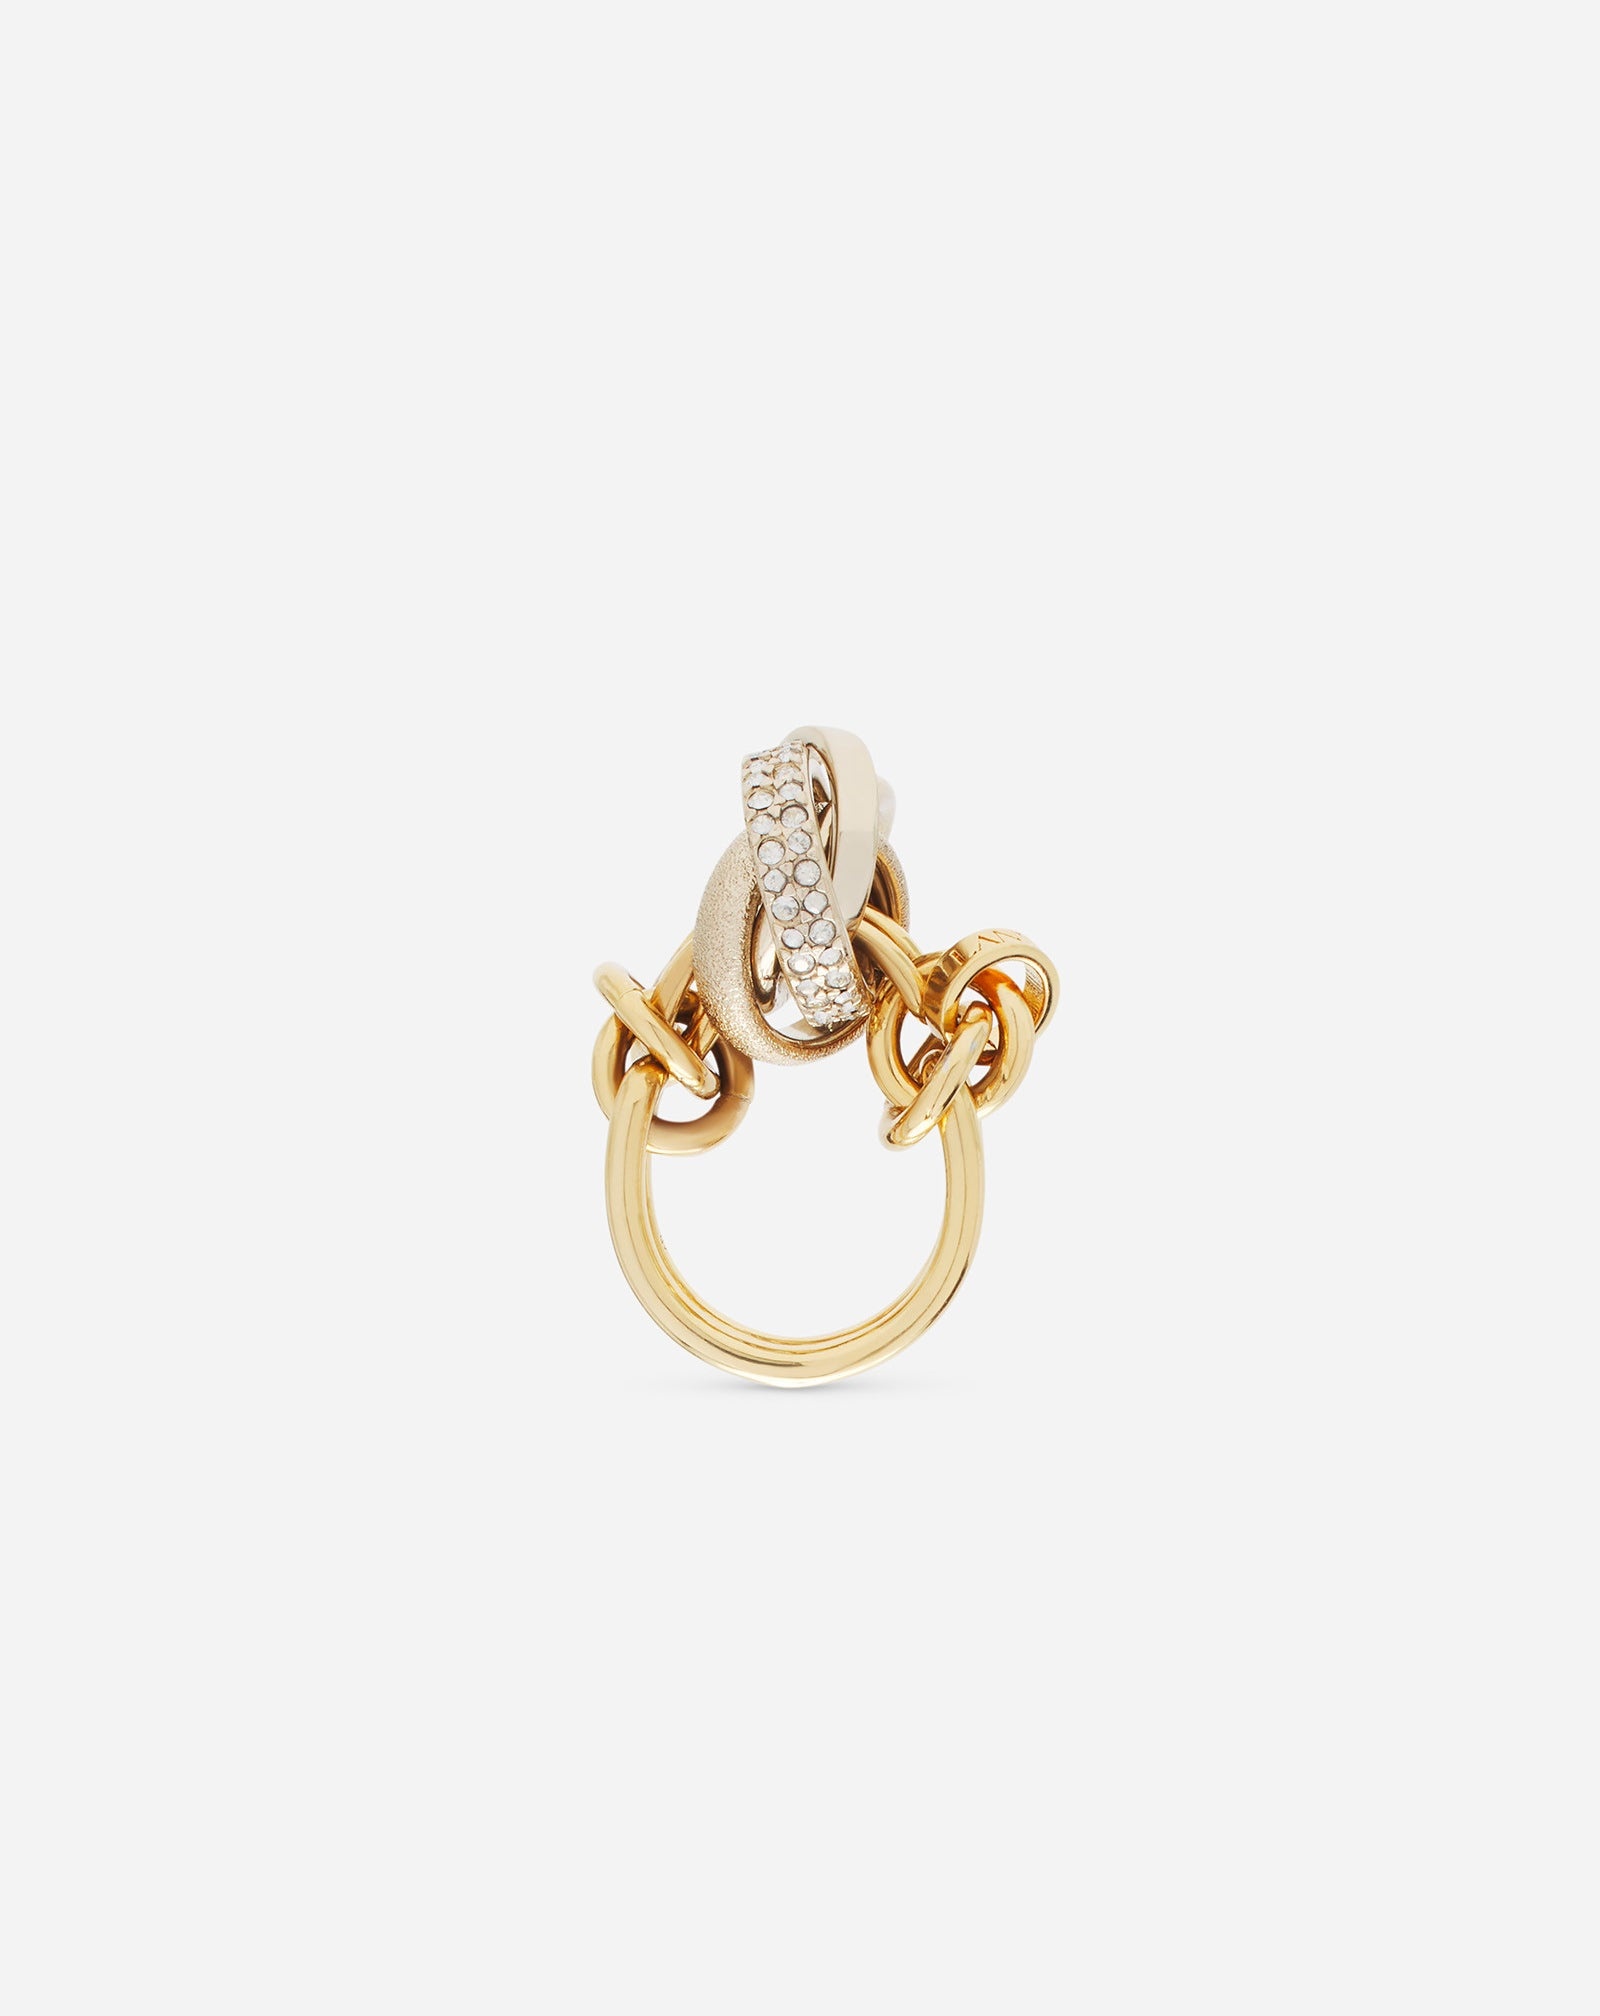 PARTITION BY LANVIN KNOT RING - 1